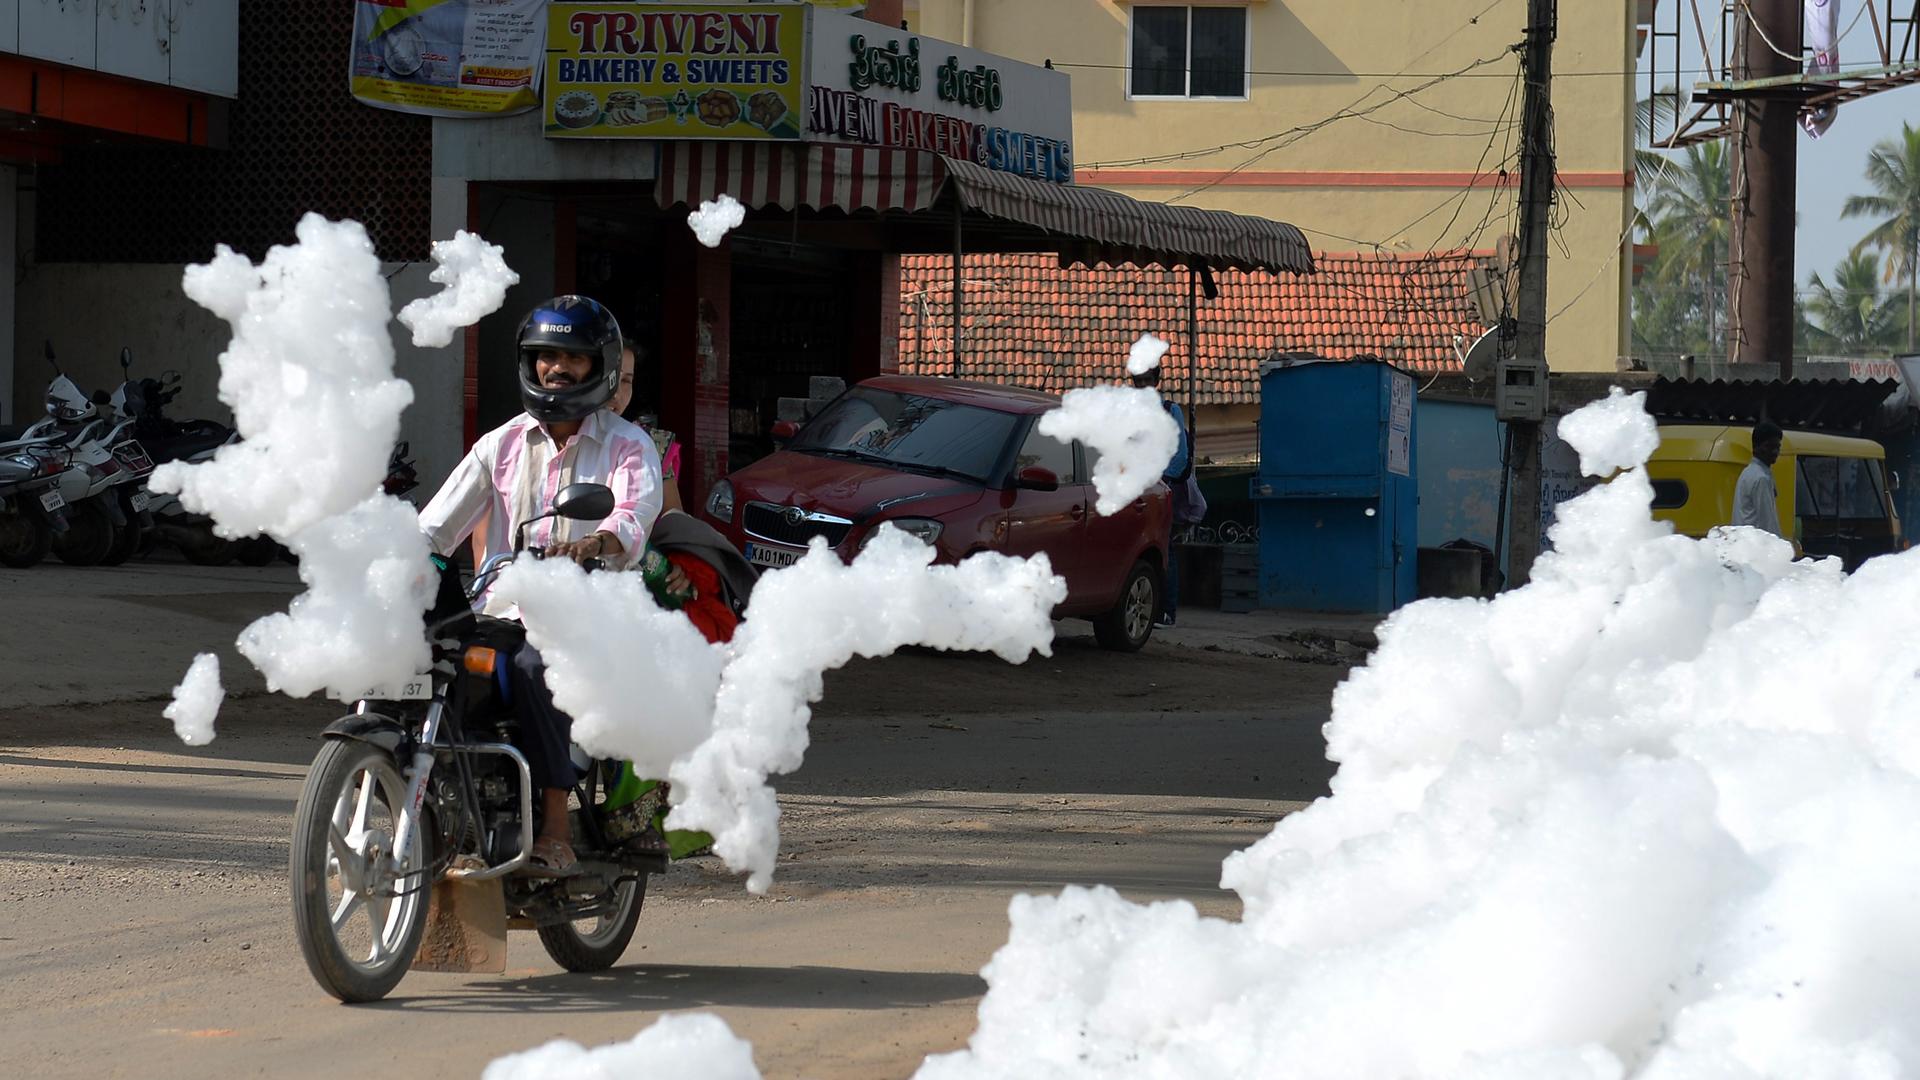 Toxic foam is a reality of life during the rainy season in parts of Bangalore, in eastern India. The foam froths up when rains churn up lakes laced with millions of gallons of residential and industrial pollutants, including phosphate laundry detergents b